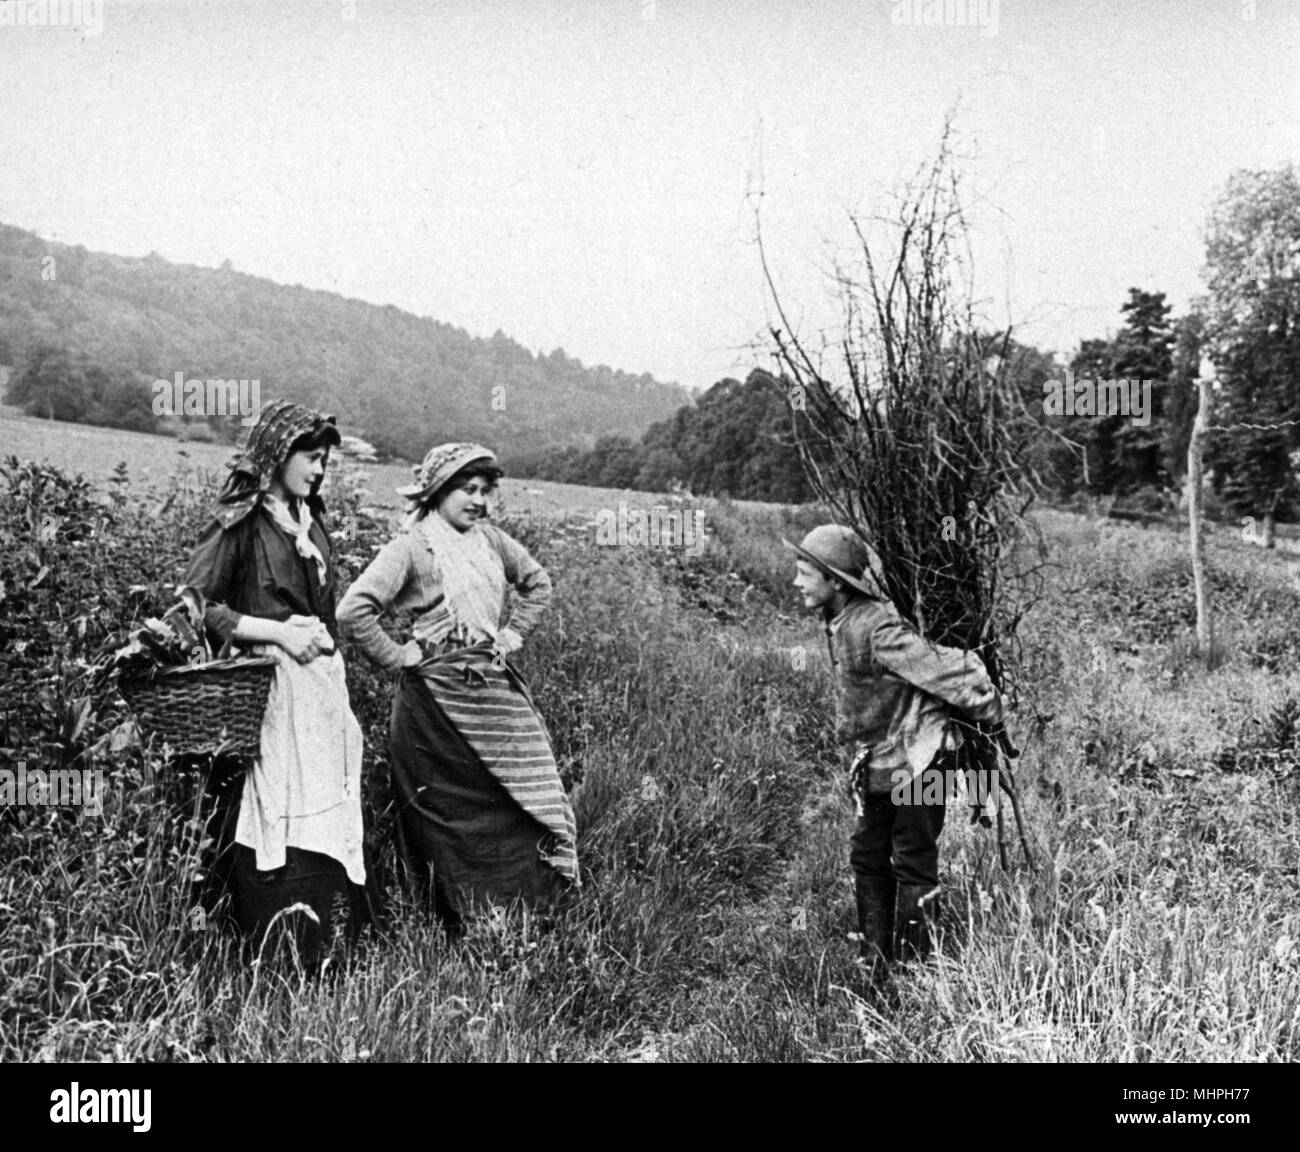 Two young countrywomen greet a boy who has been collecting a bundle of sticks, 1890s     Date: 1890s Stock Photo